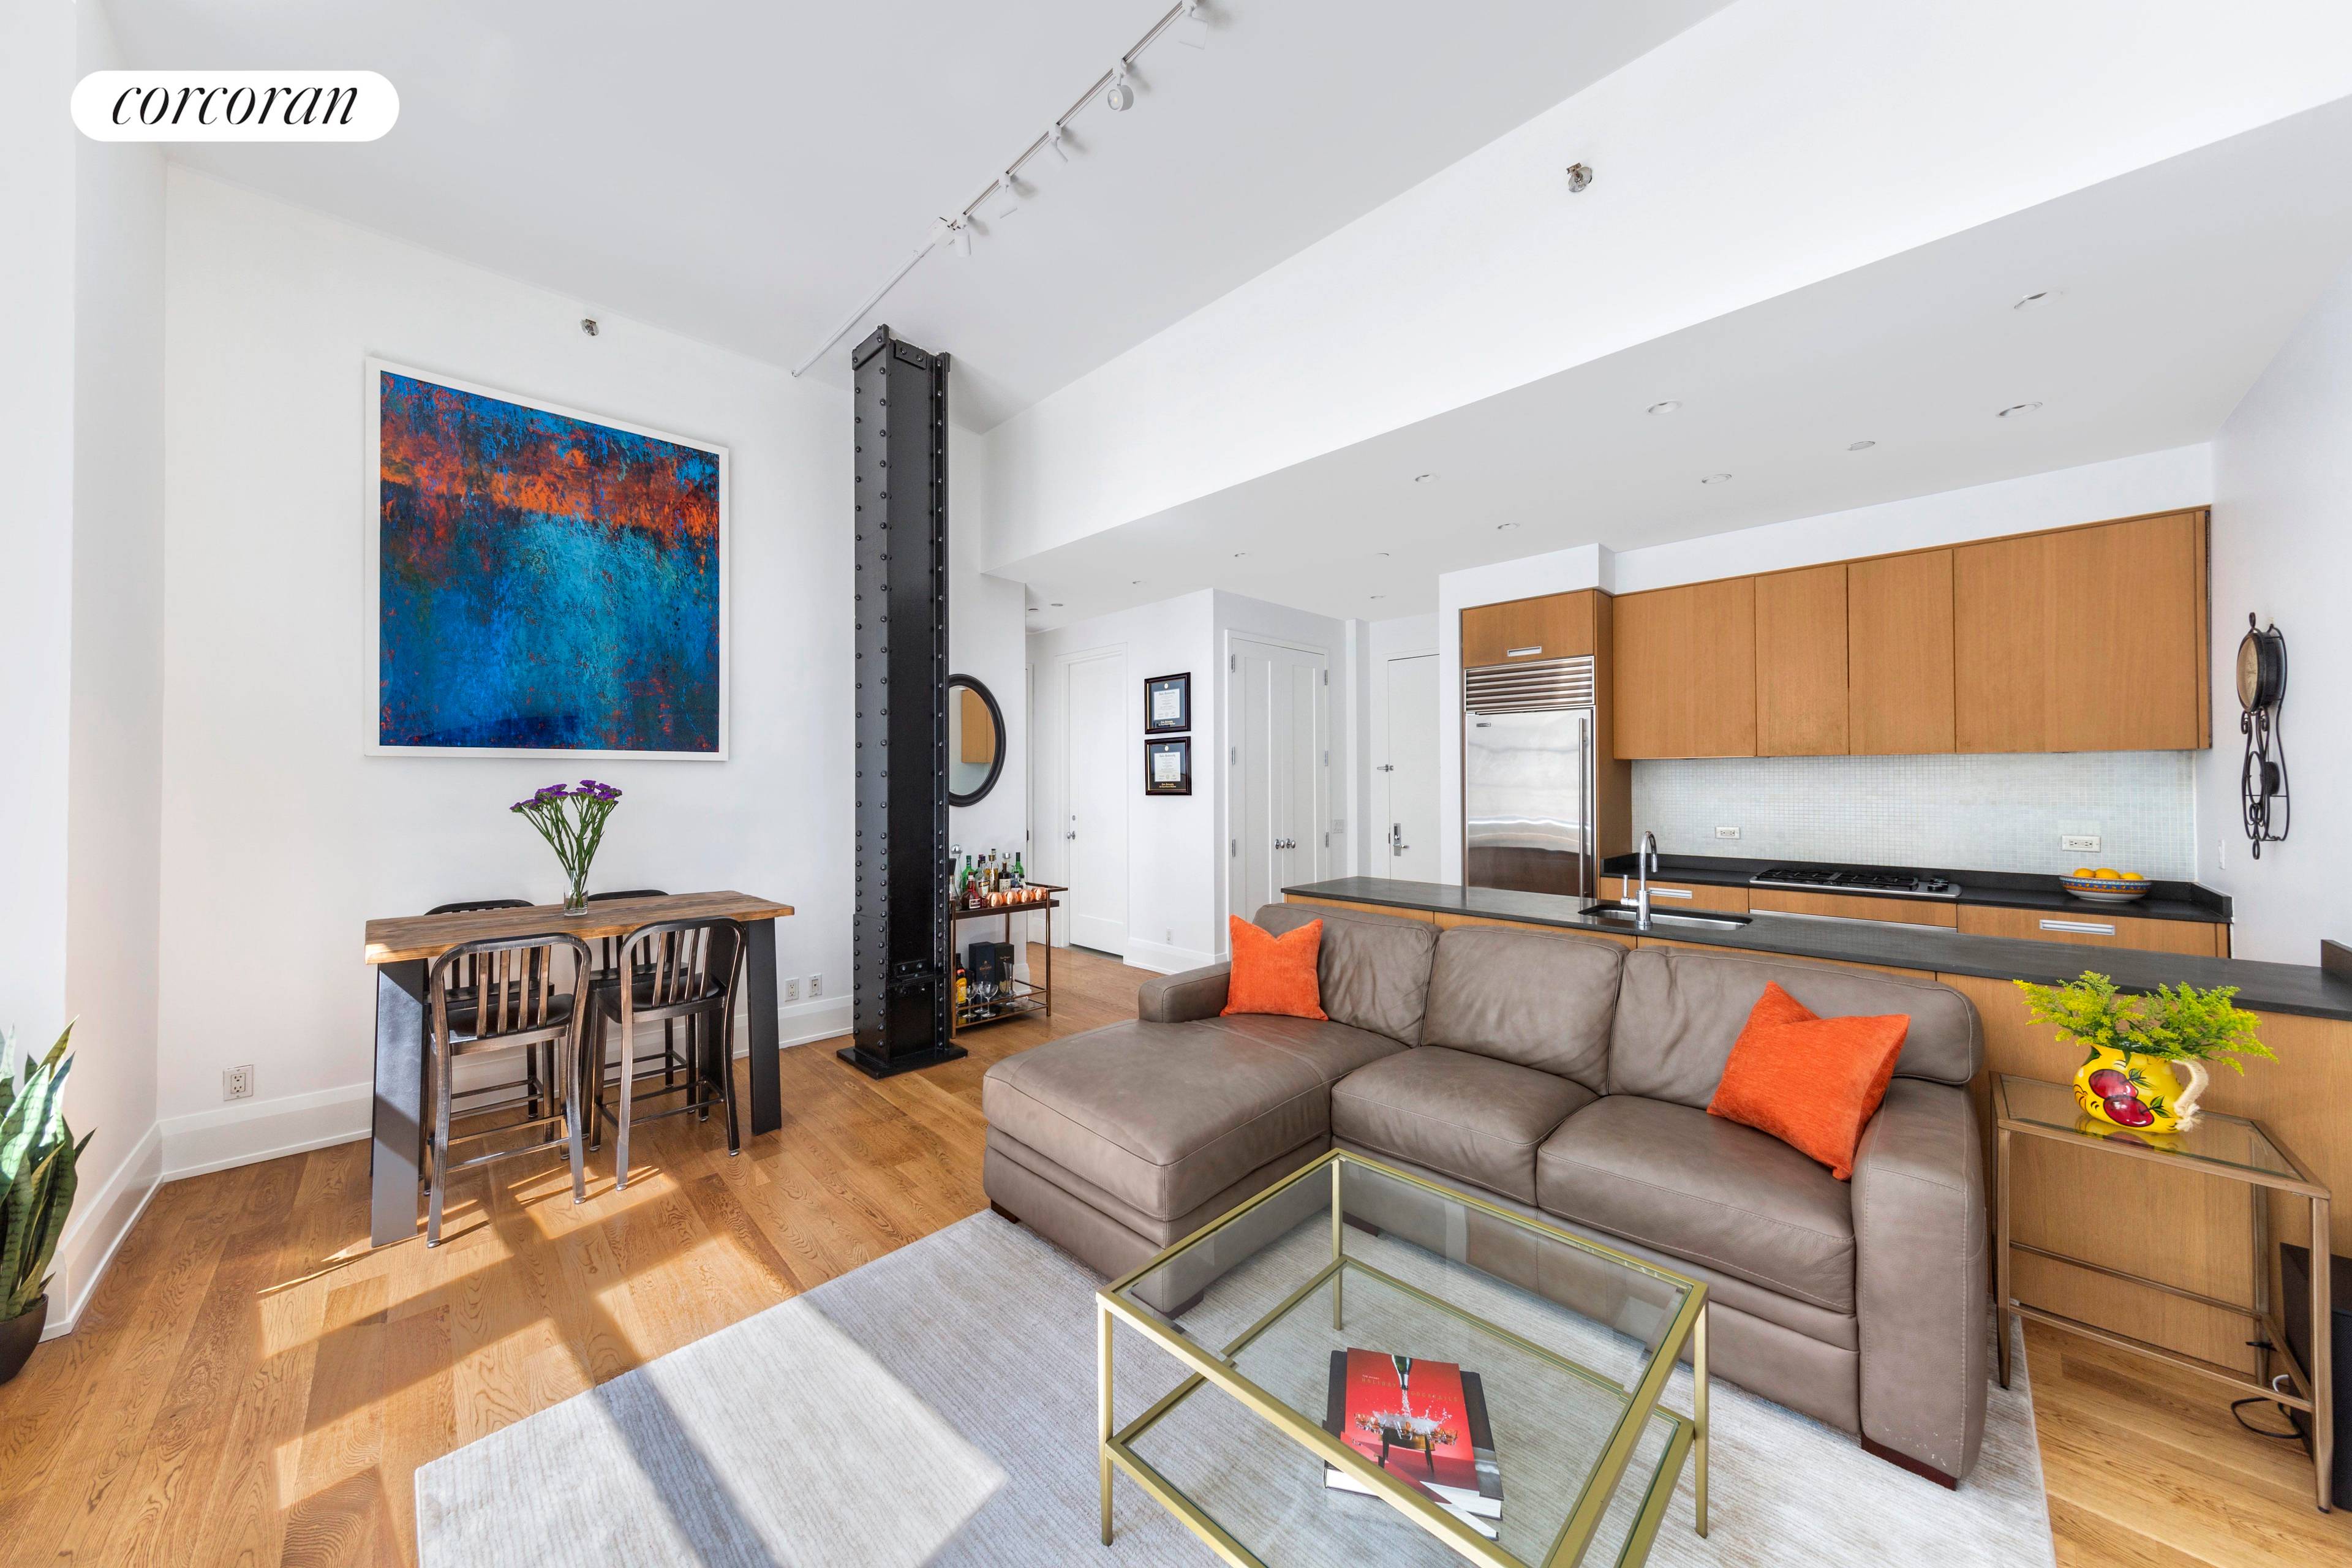 Welcome home to your dreamy Downtown loft in the prestigious Croft Building.